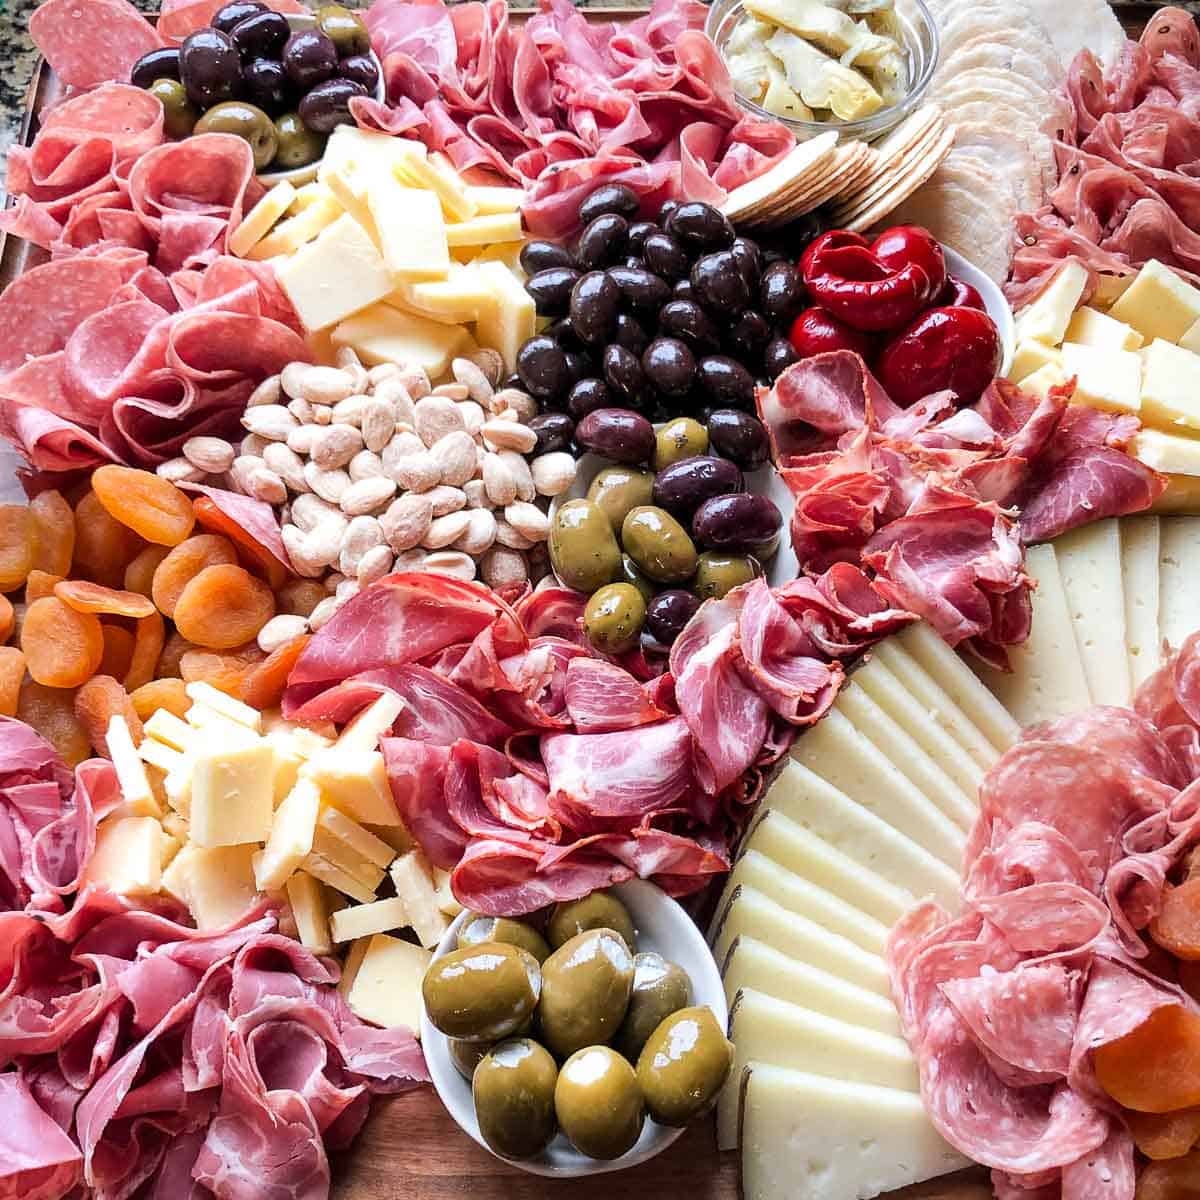 Charcuterie boards and food safety - High Plains Journal